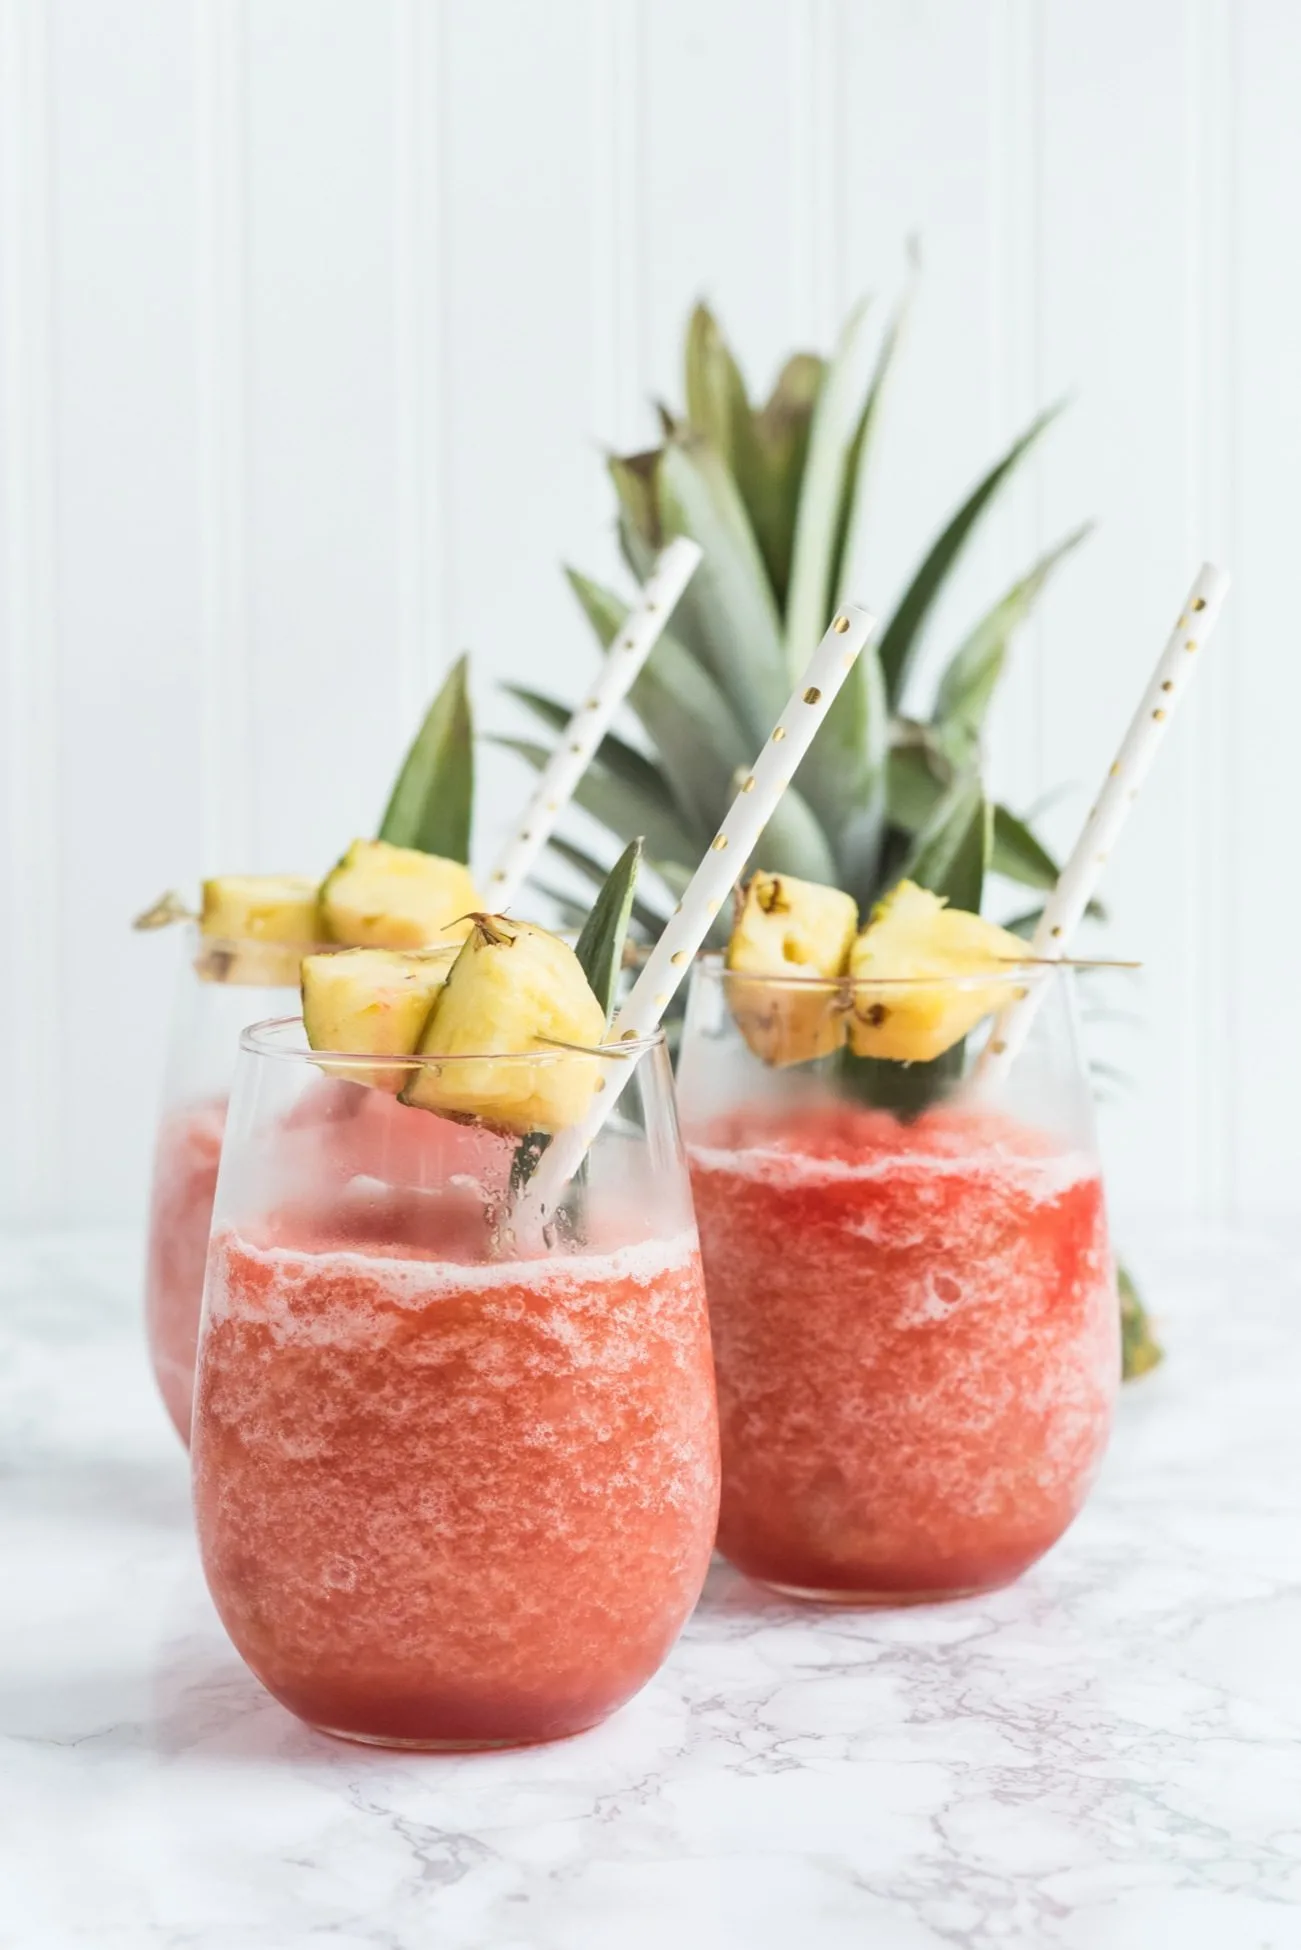 Coconut Pineapple Rum Slush Tropical Cocktail Recipe | Tropical cocktails, cocktail recipes, party ideas, entertaining tips and more from @cydconverse